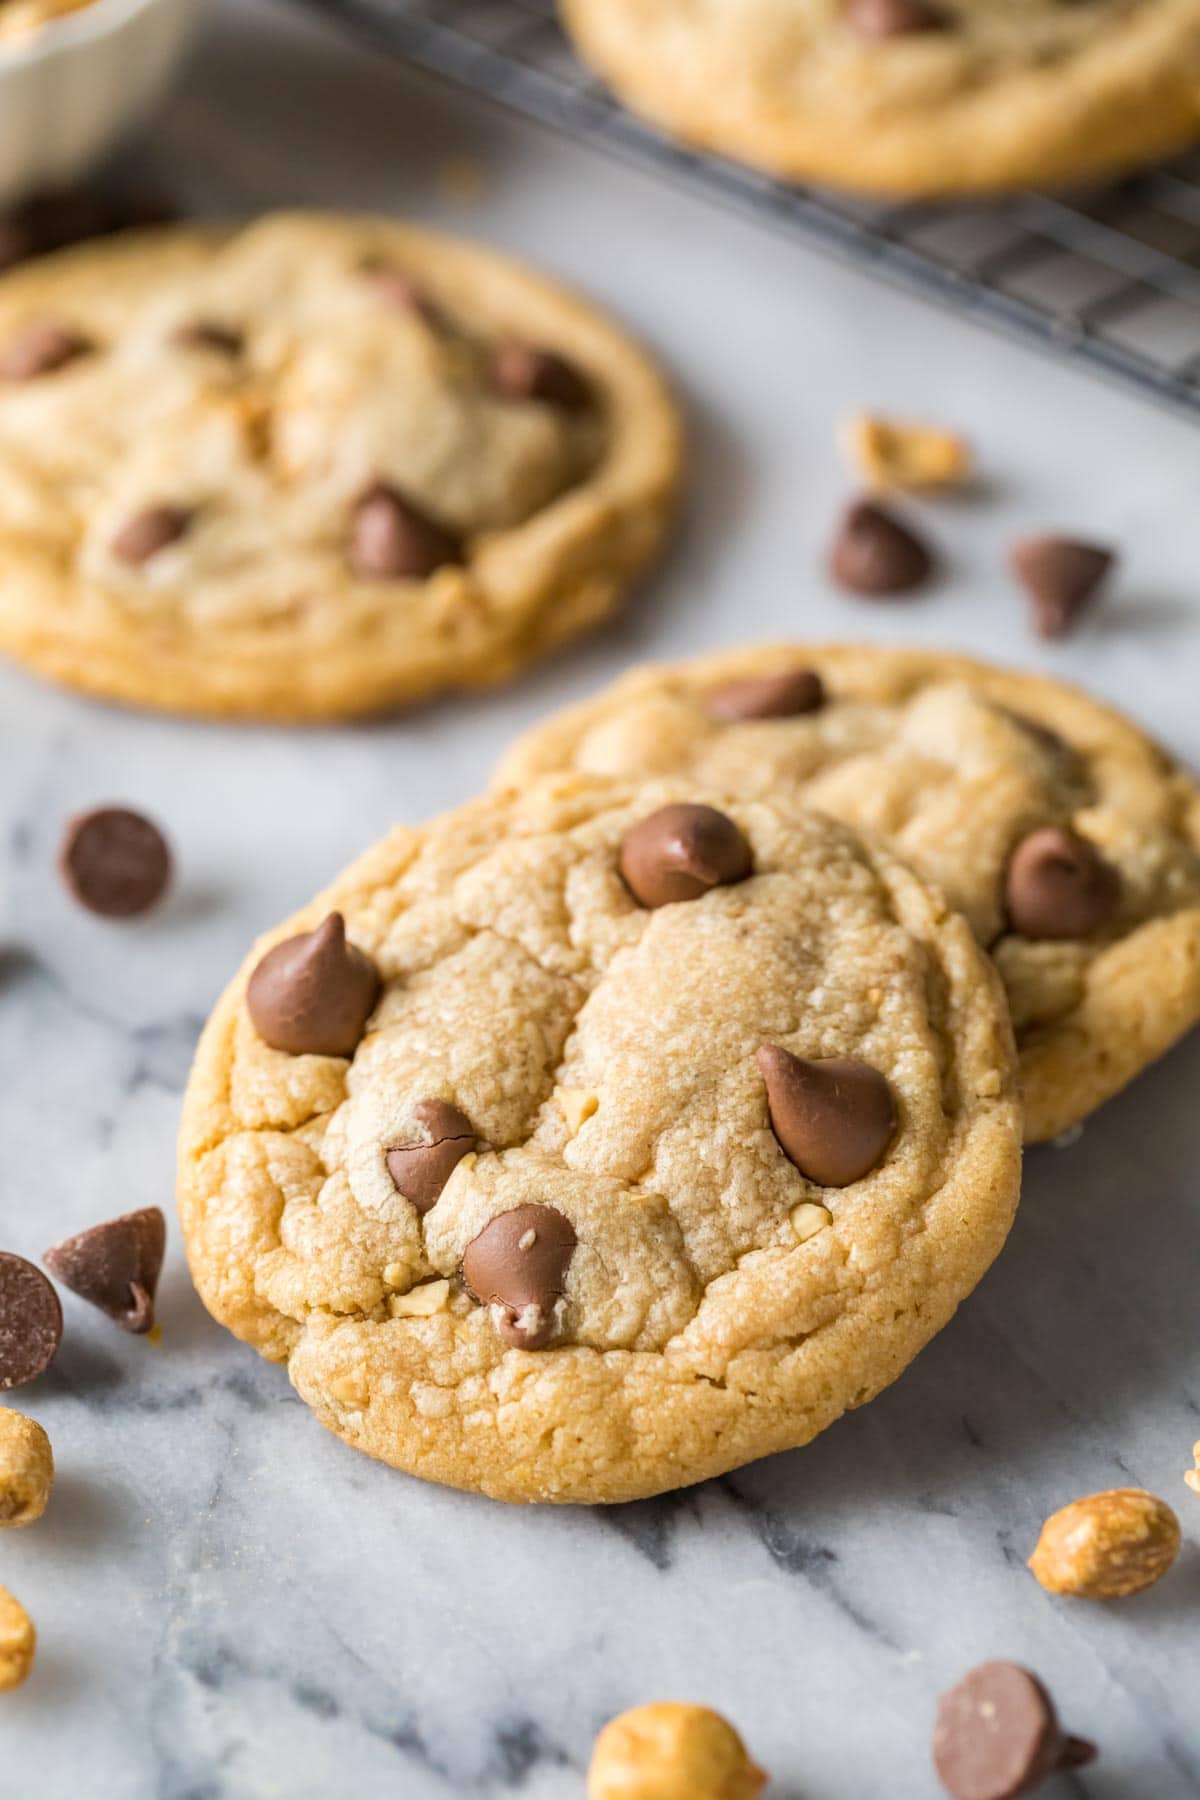 Close-up view of two peanut butter chocolate chip cookies.